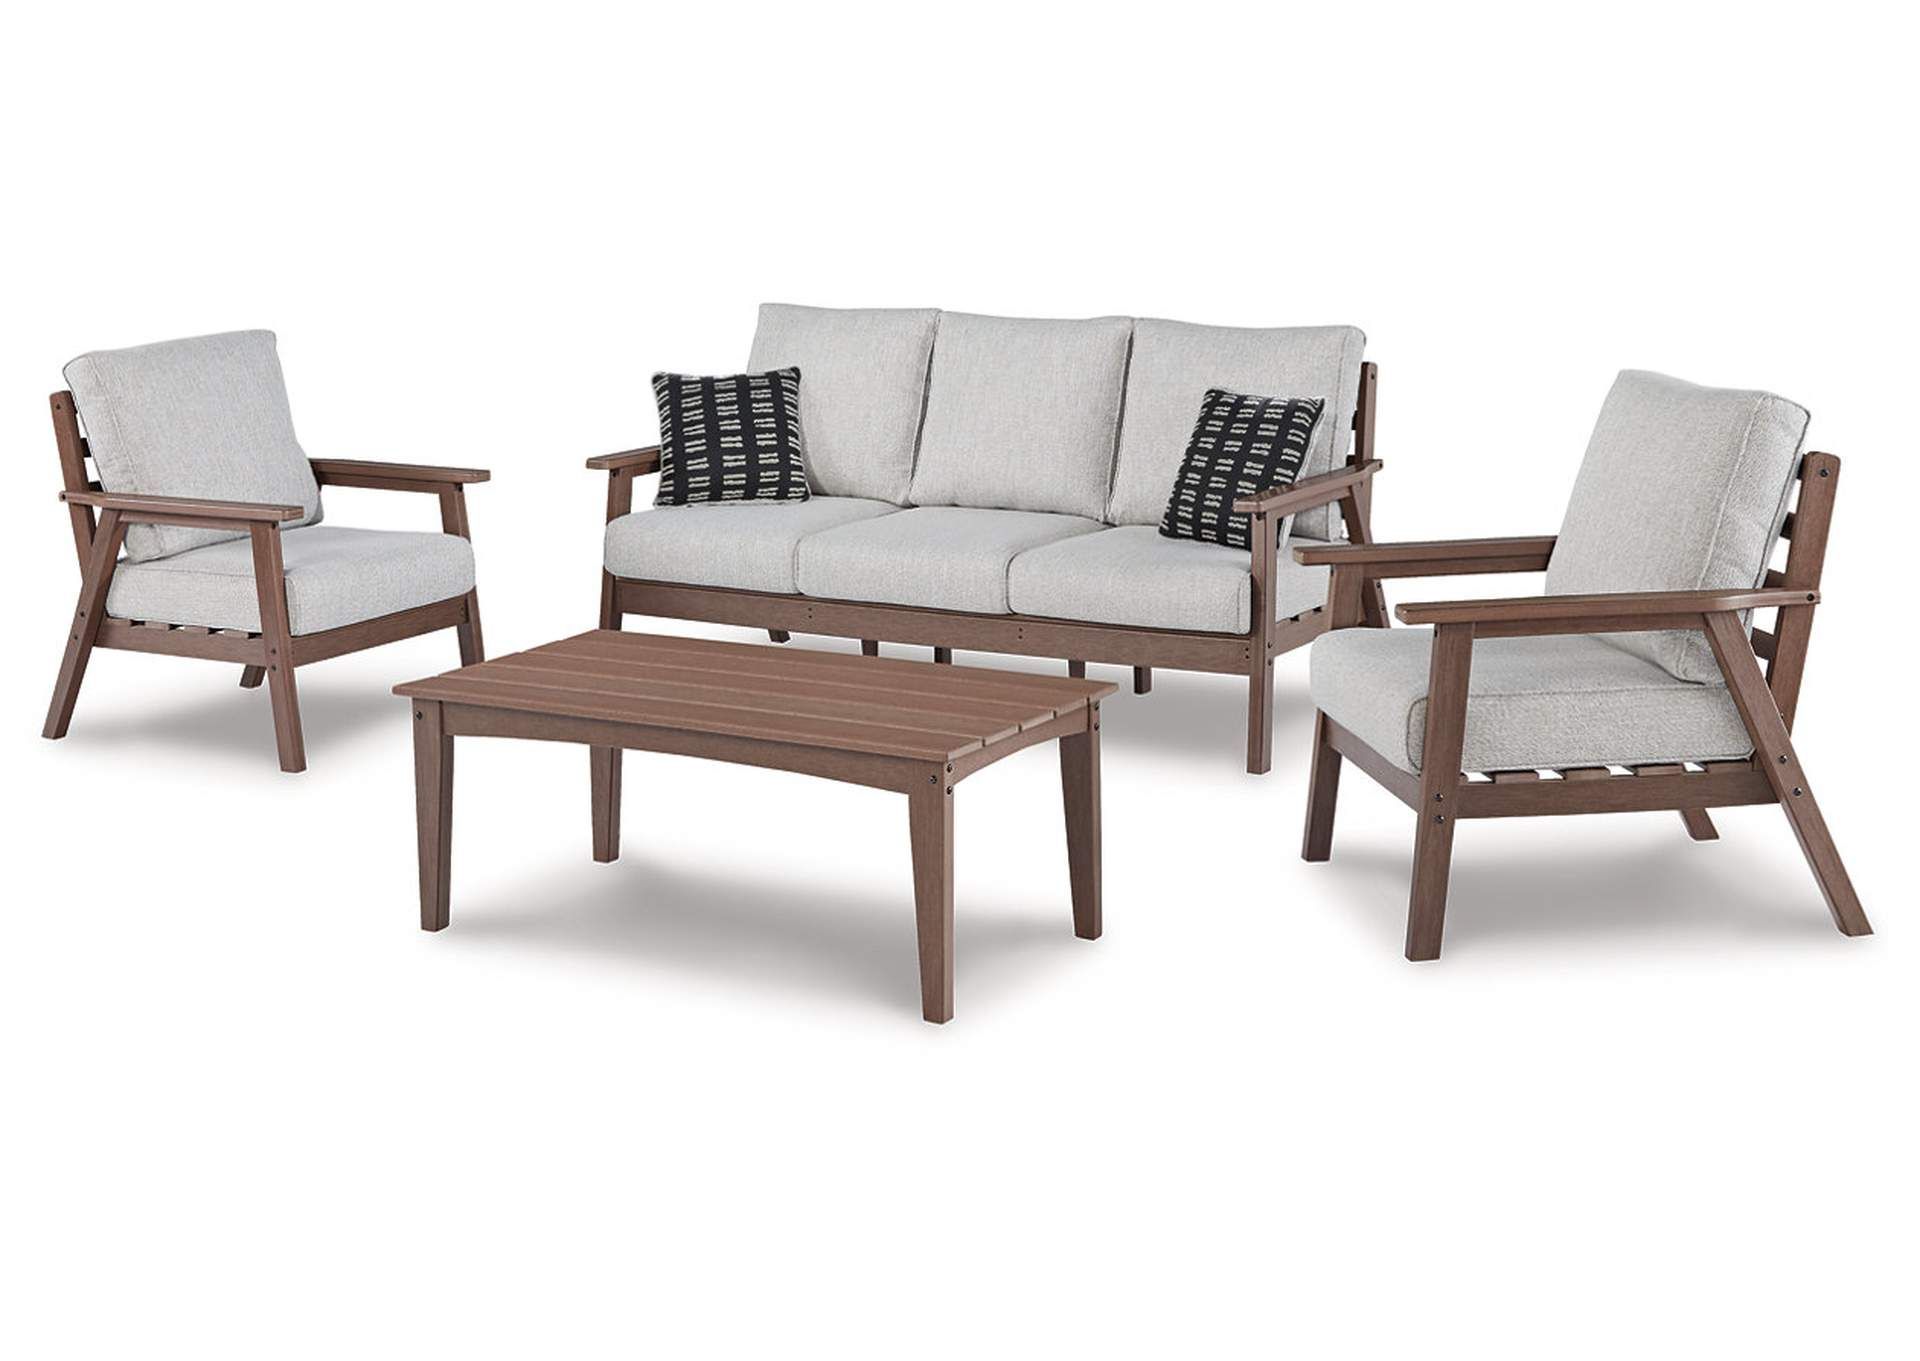 Outdoor 2 Arm Chairs And Coffee Table With Regard To Well Known Emmeline Outdoor Sofa And 2 Chairs With Coffee Table Ivan Smith Furniture (View 8 of 15)